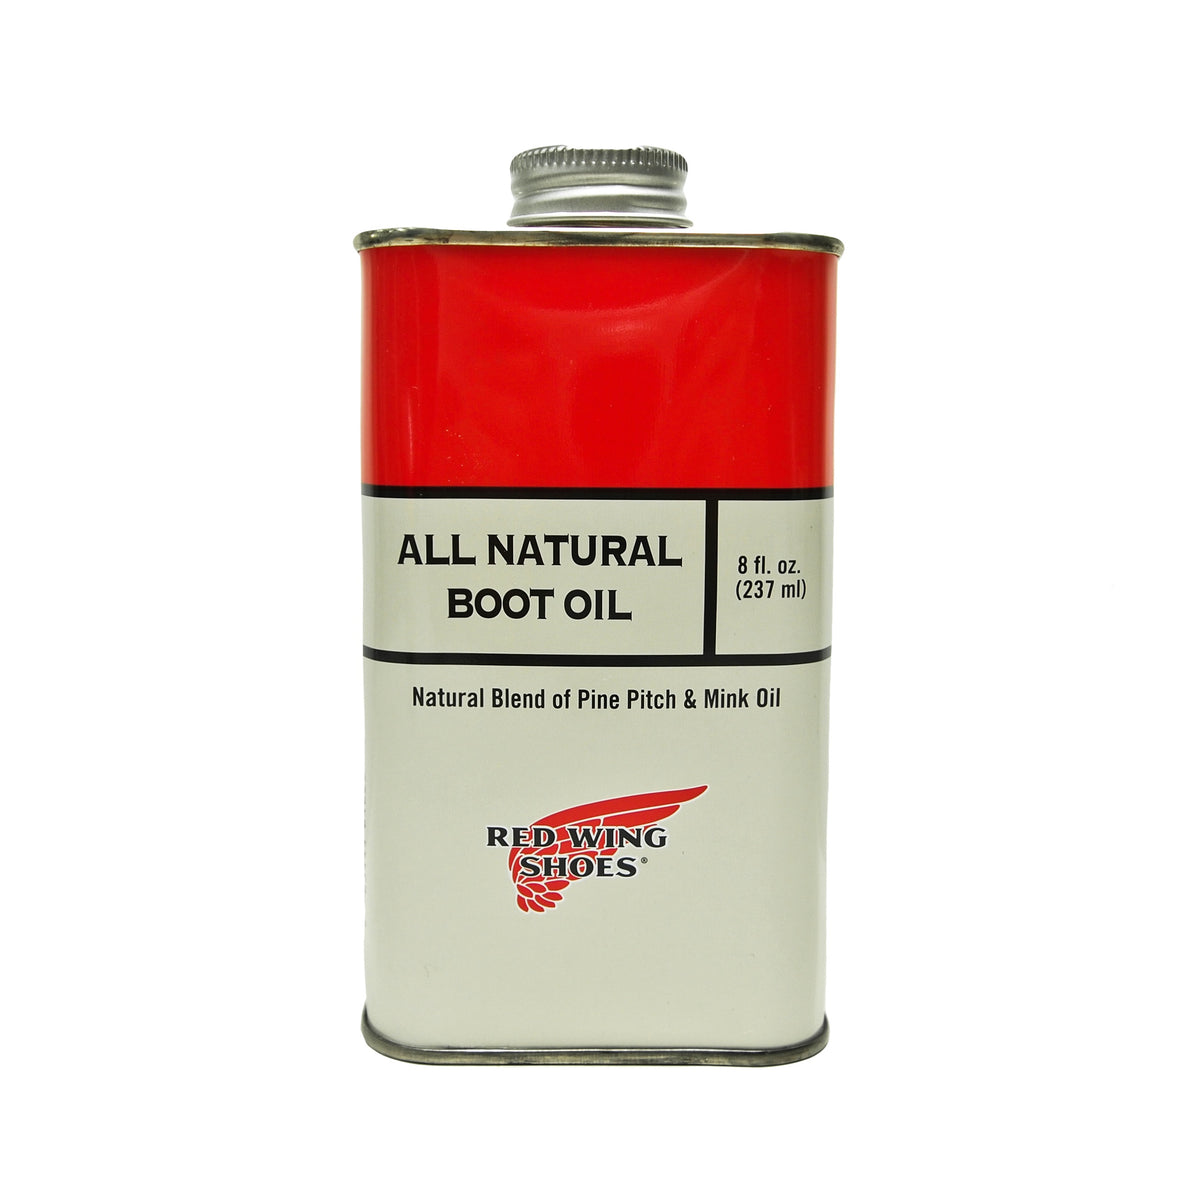 RED WING ALL NATURAL BOOT OIL – Rugged 